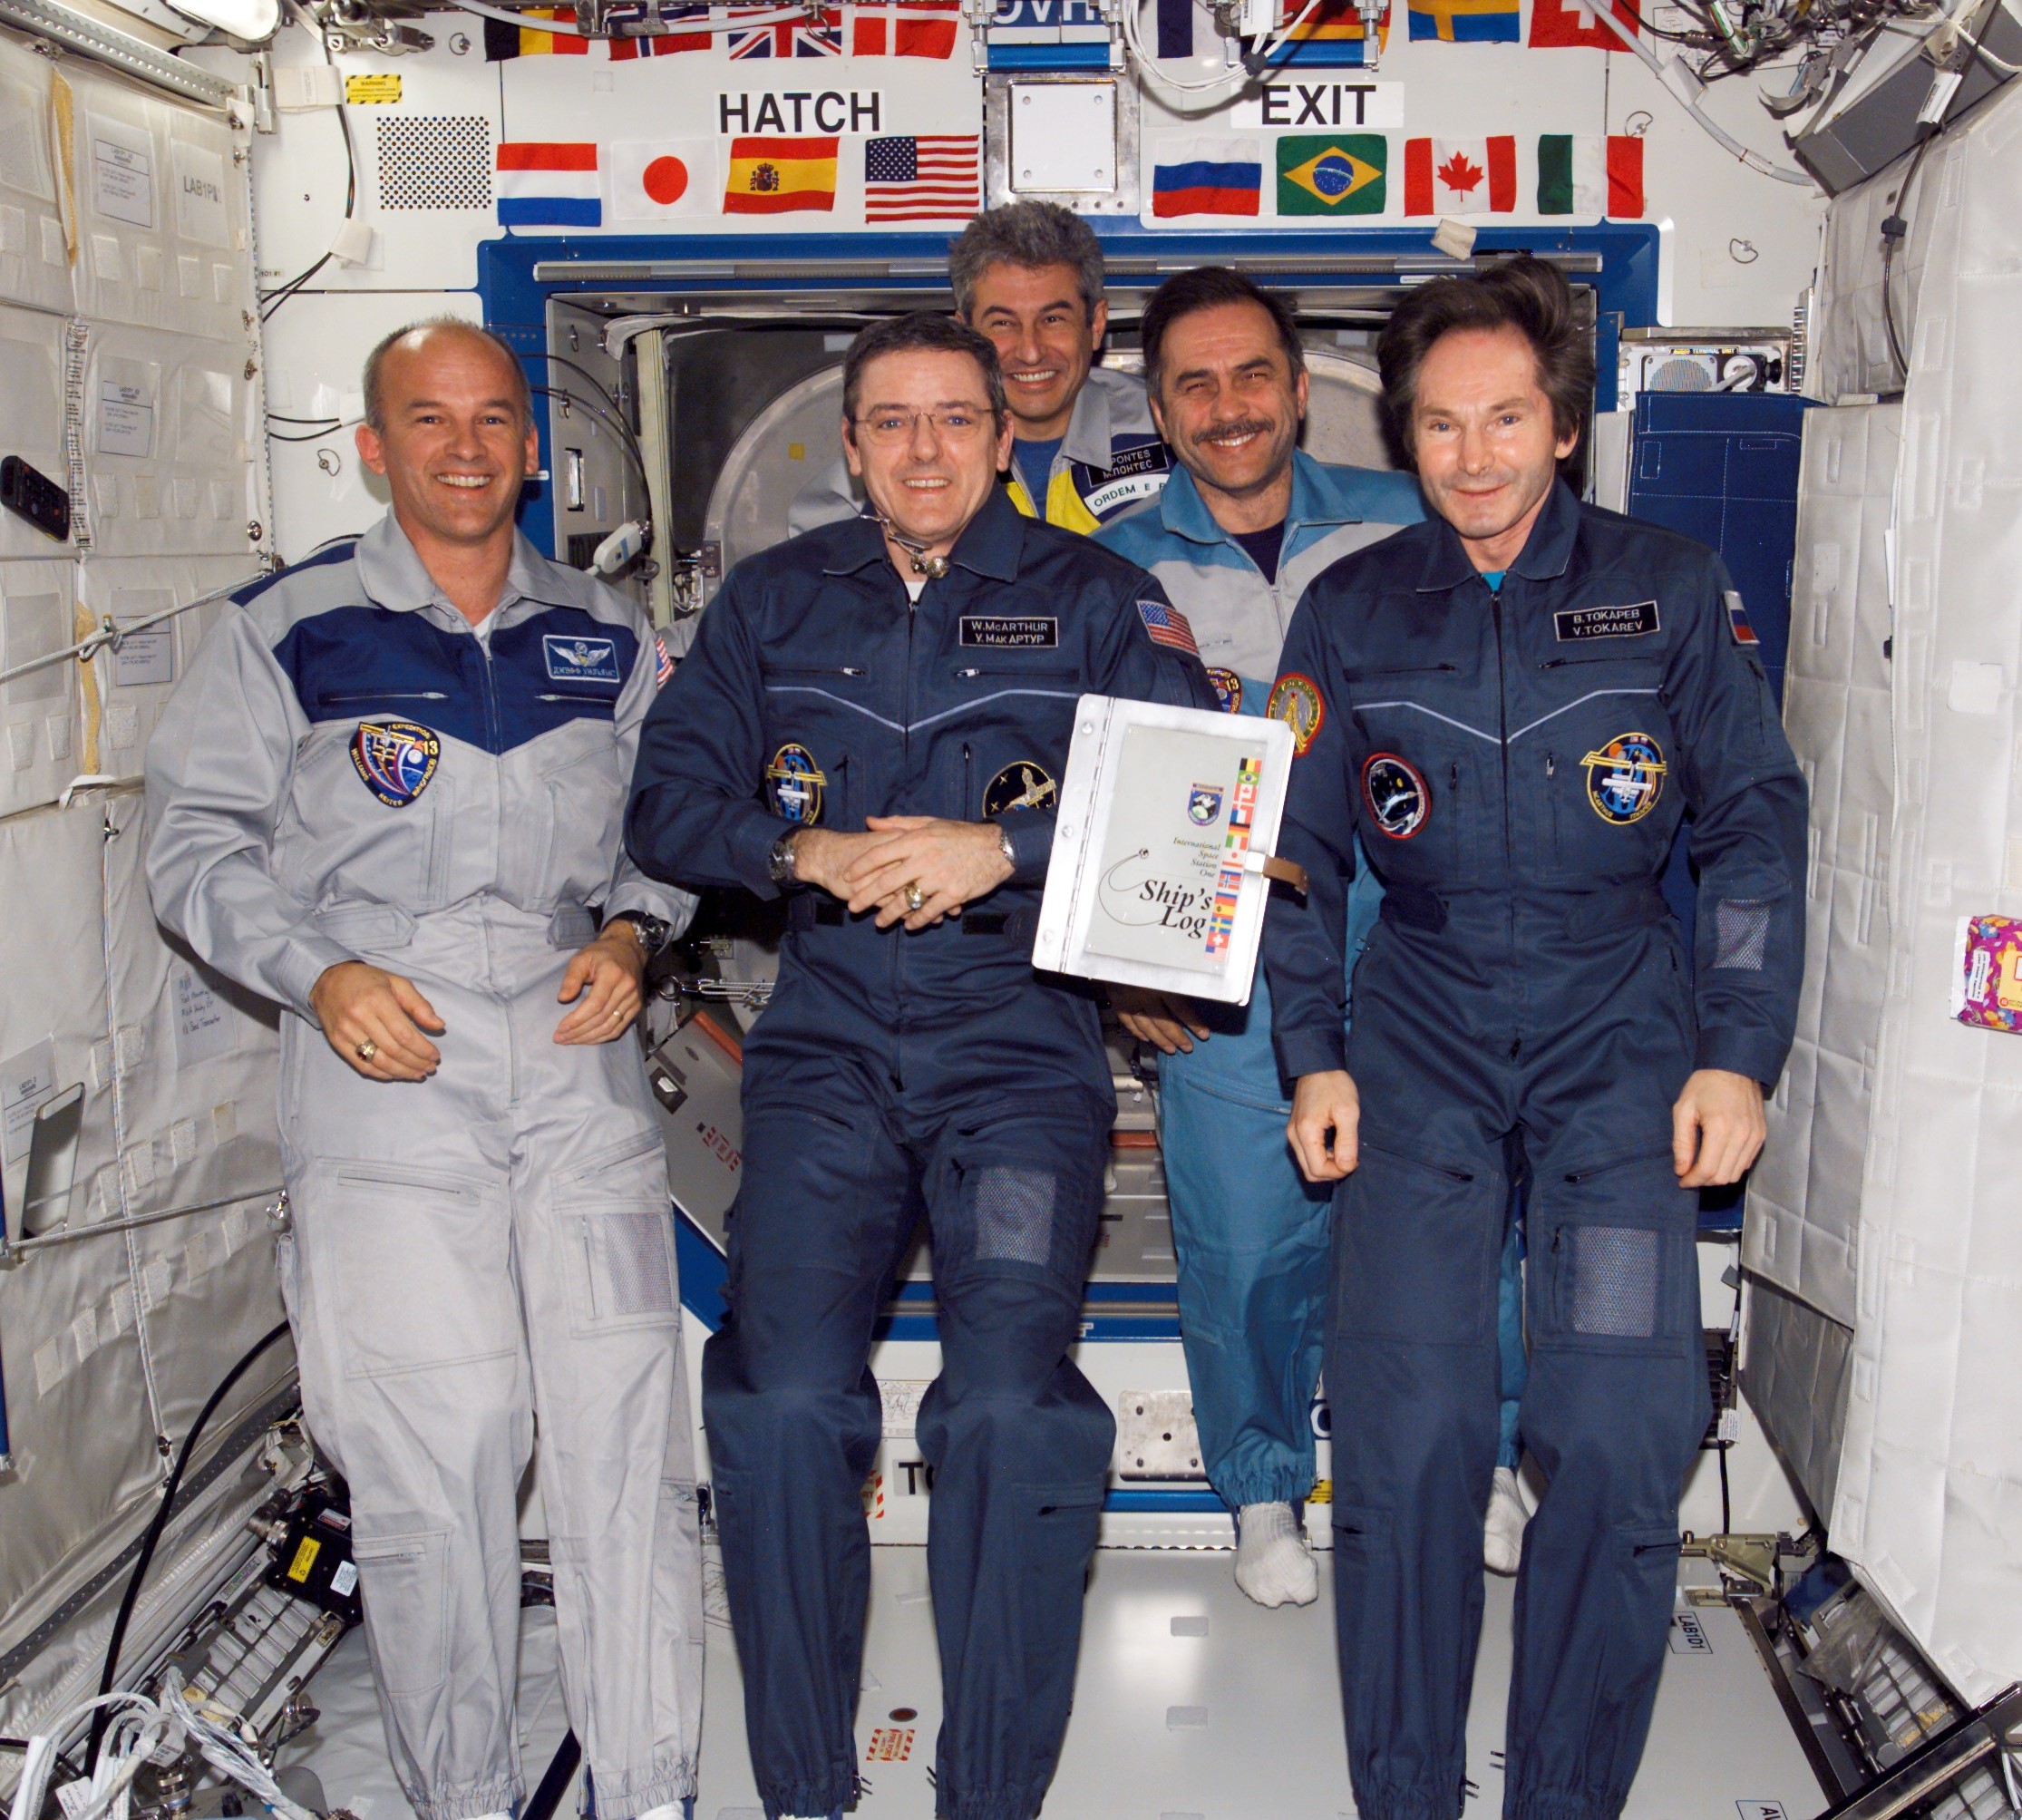 Brazilian astronaut Marcos Pontes, center at rear, with his Expedition 12 and 13 crewmates